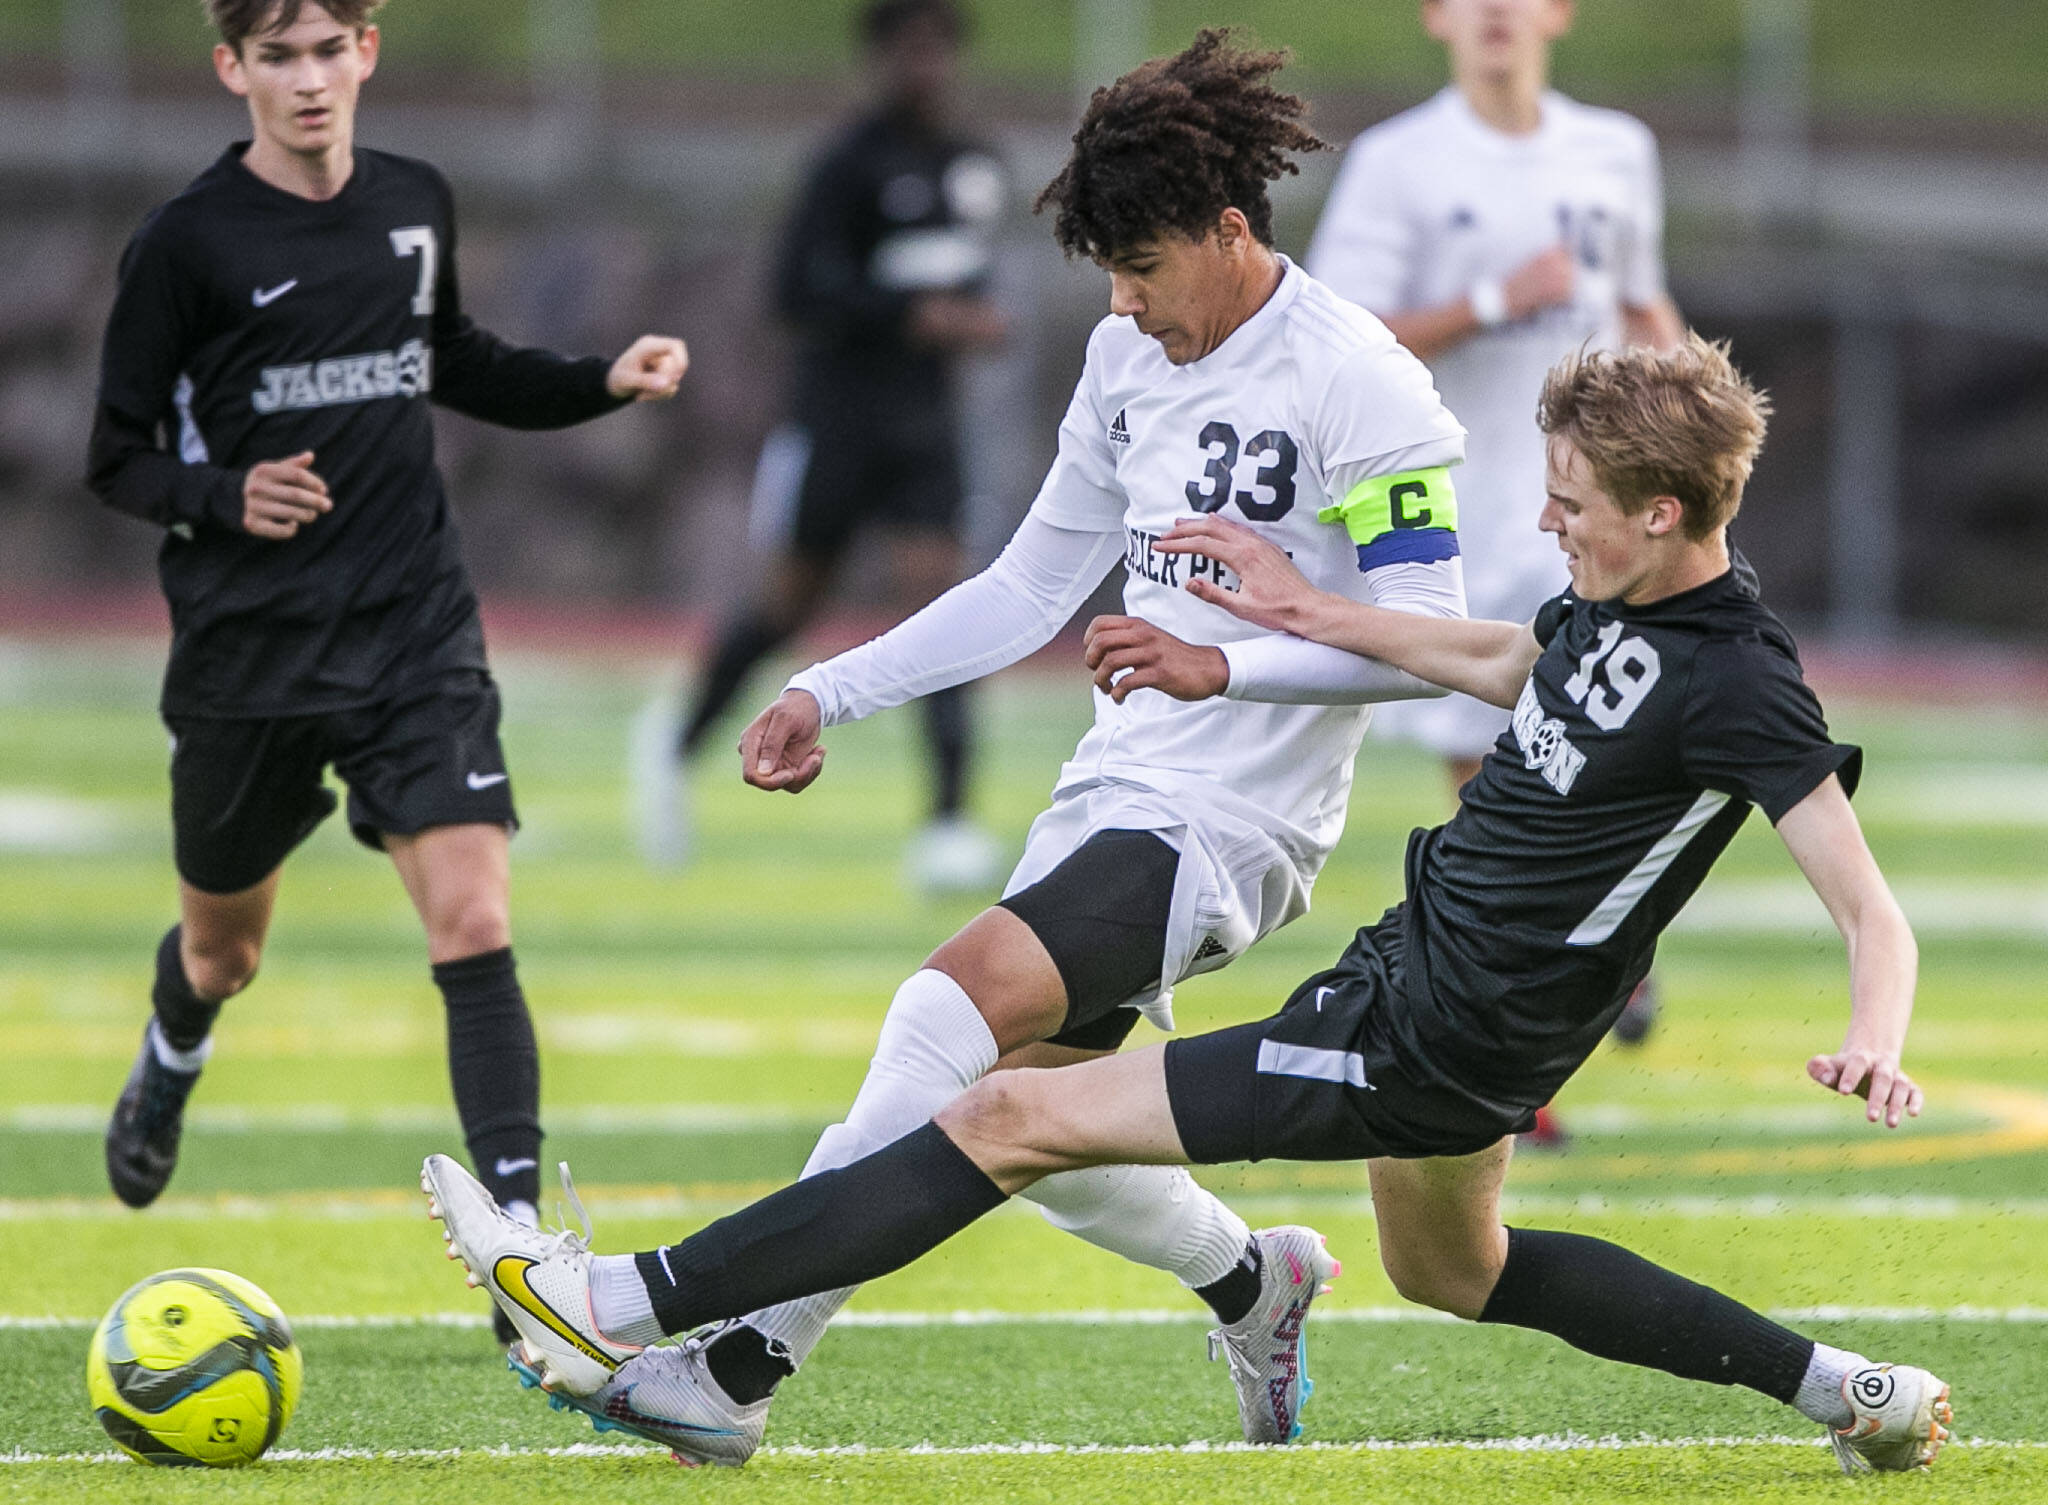 Glacier Peak’s Azavier Coppin is slide tackled by Jackson’s Sam Russel during the game on Friday, April 28, 2023 in Snohomish, Washington. (Olivia Vanni / The Herald)